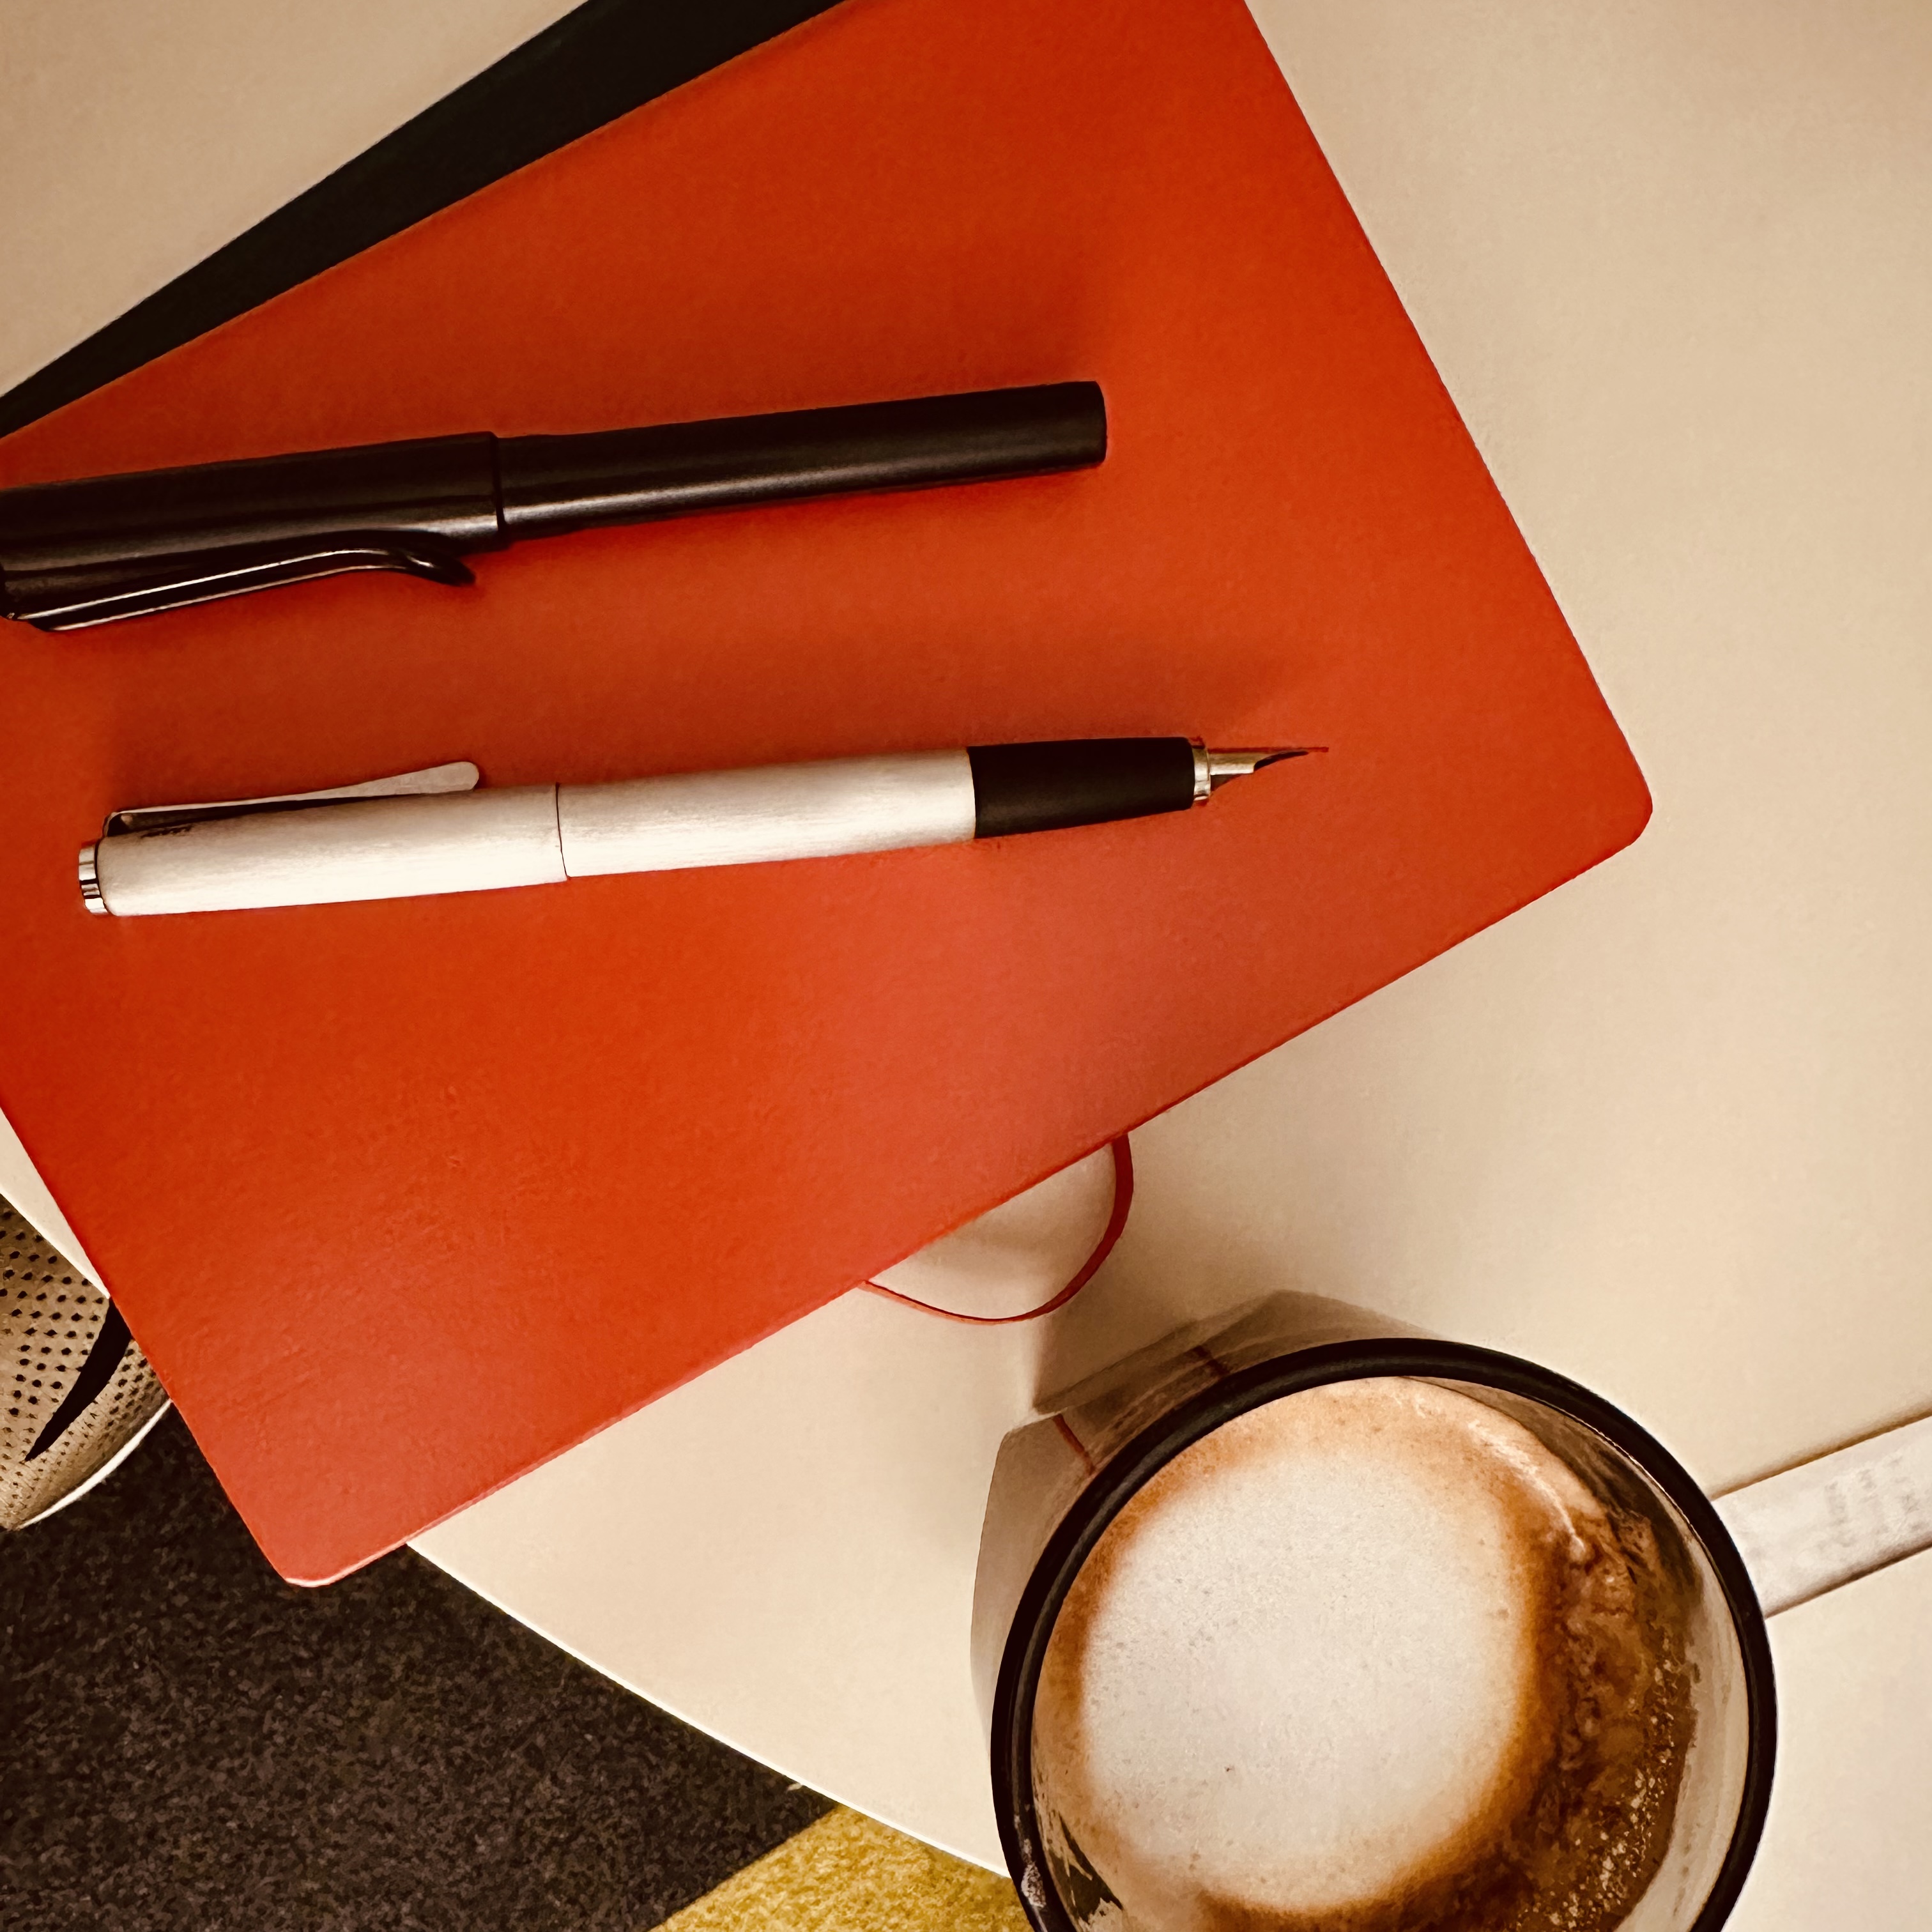 Two fountain pens sit on an orange hardbound journal. One pen is silver colored, a Pilot Studio with black barrel with its cap posted. The other is a black Lamy Safari. Beside the journal is a half full cup of cappuccino. 